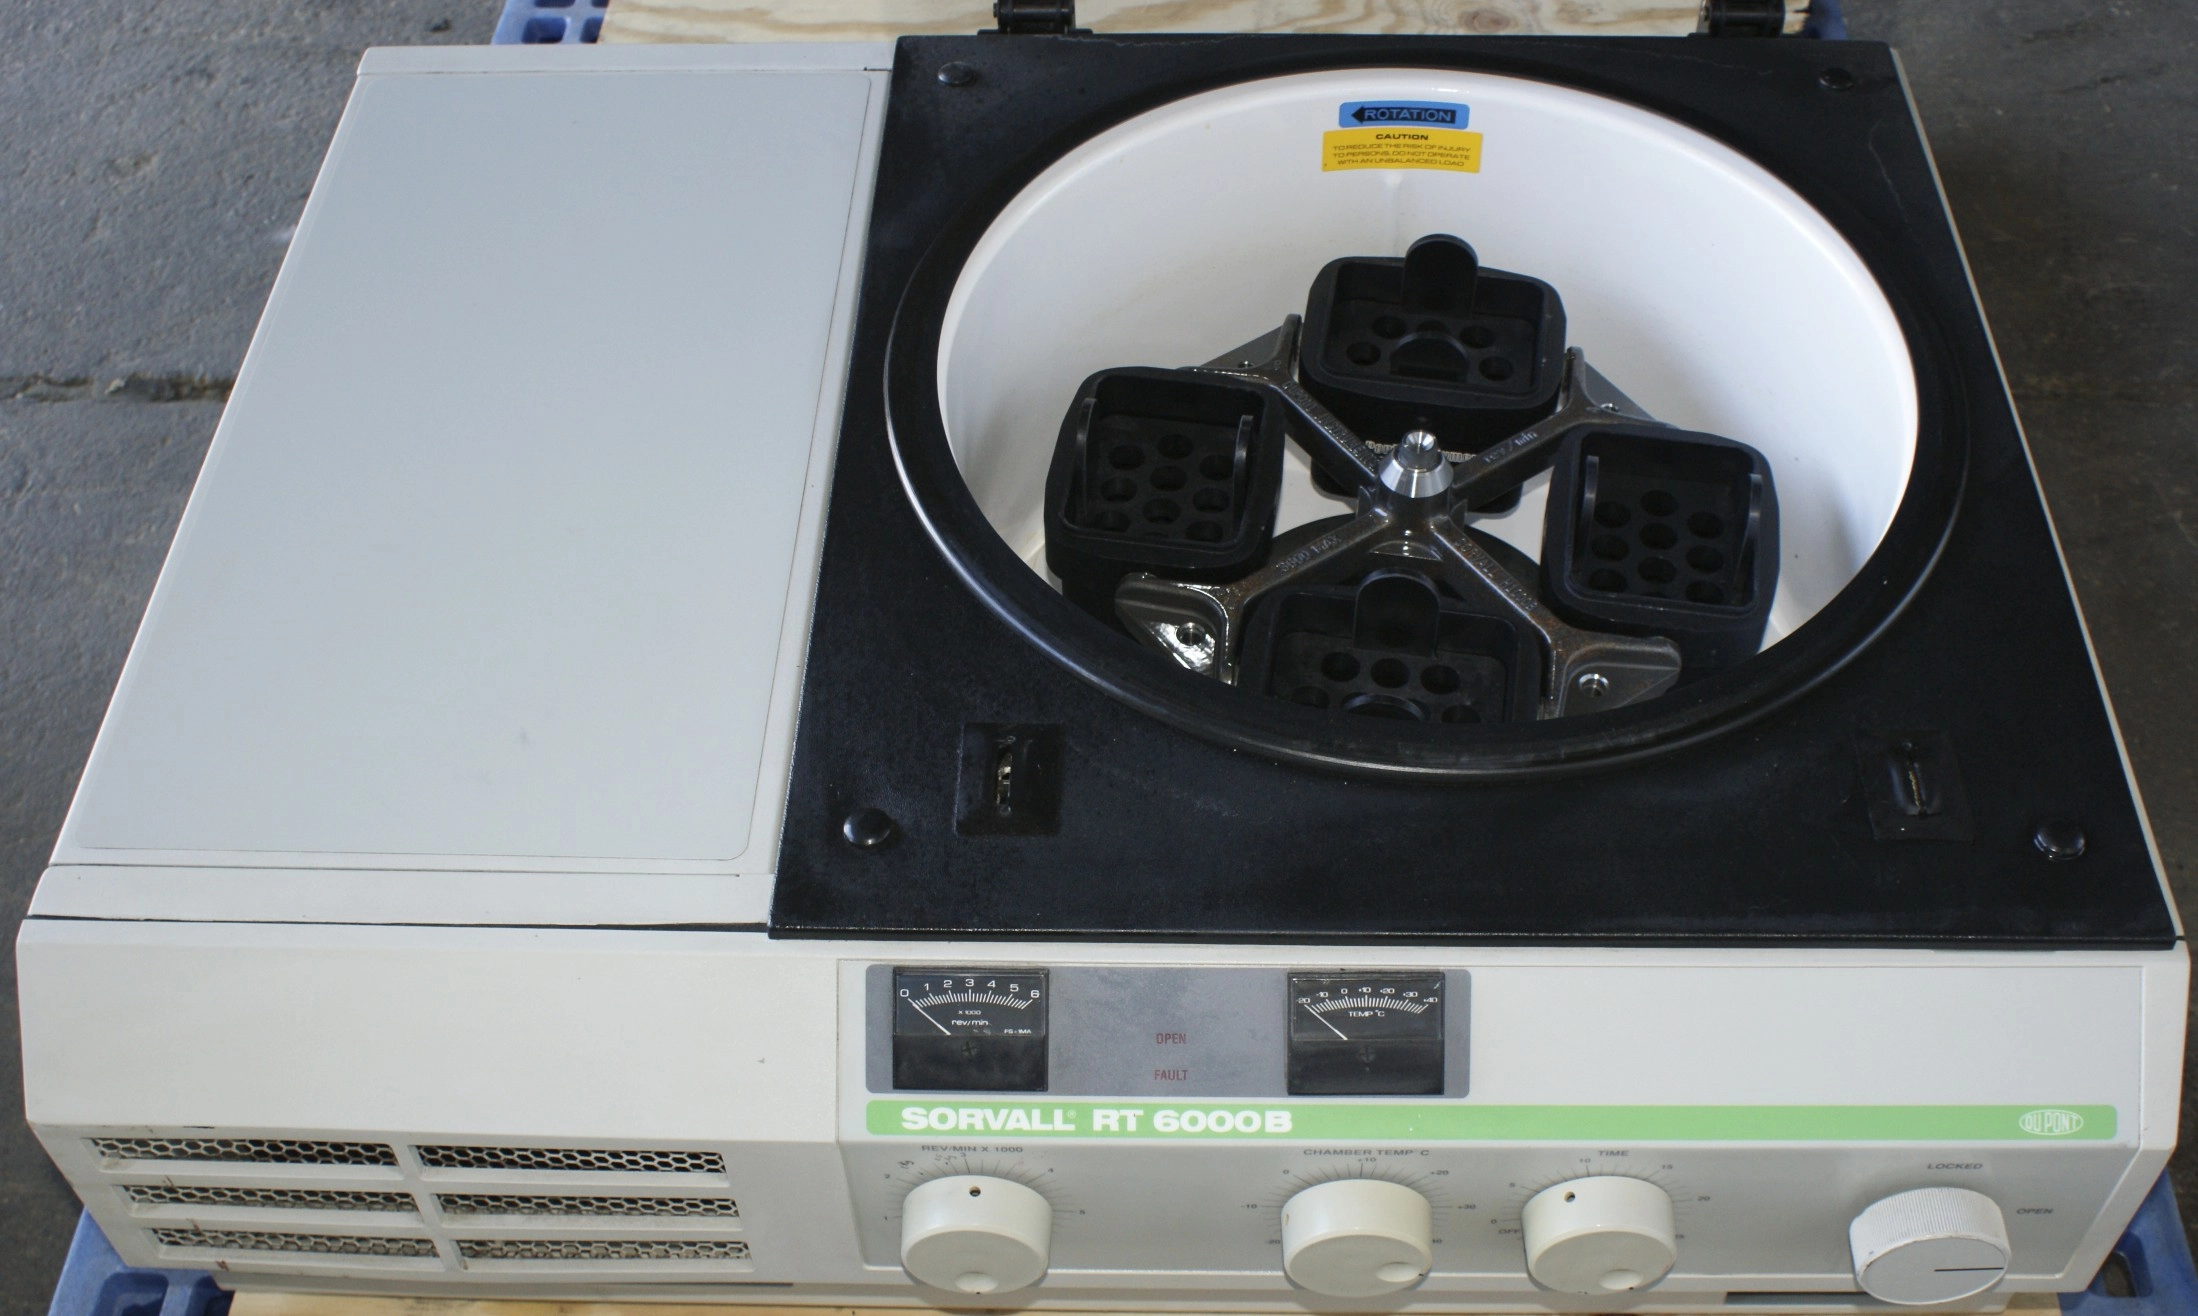 Sorvall RT 6000B Refrigerated Centrifuge Sorvall RT6000B Centrifuge Sorvall RT 6000B Refrigerated Centrifuge used nice